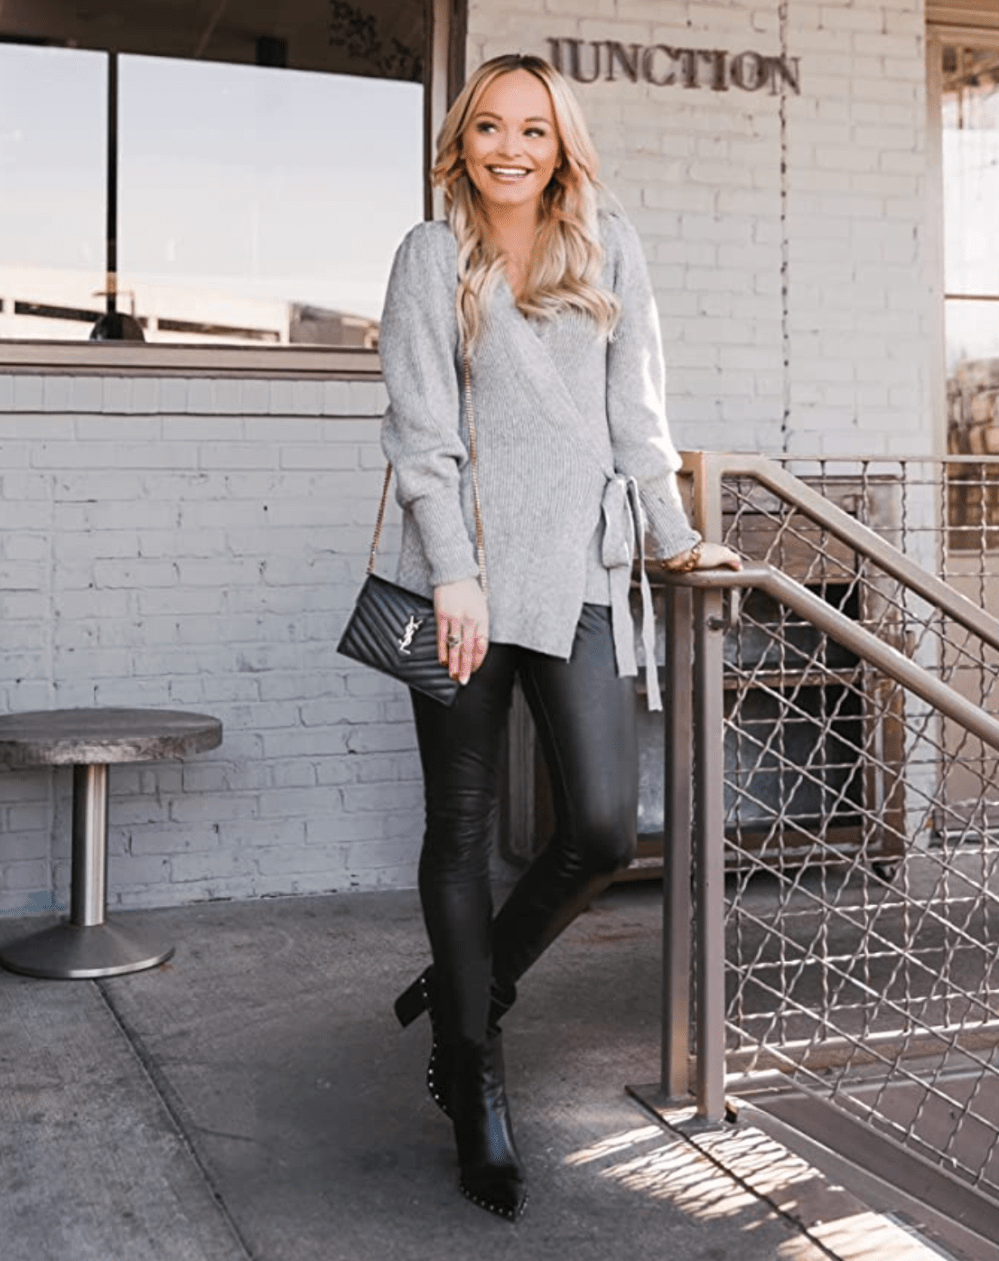 Kirundo Wrap Sweater Is One of Amazon’s Top-Selling Knit Pieces | UsWeekly